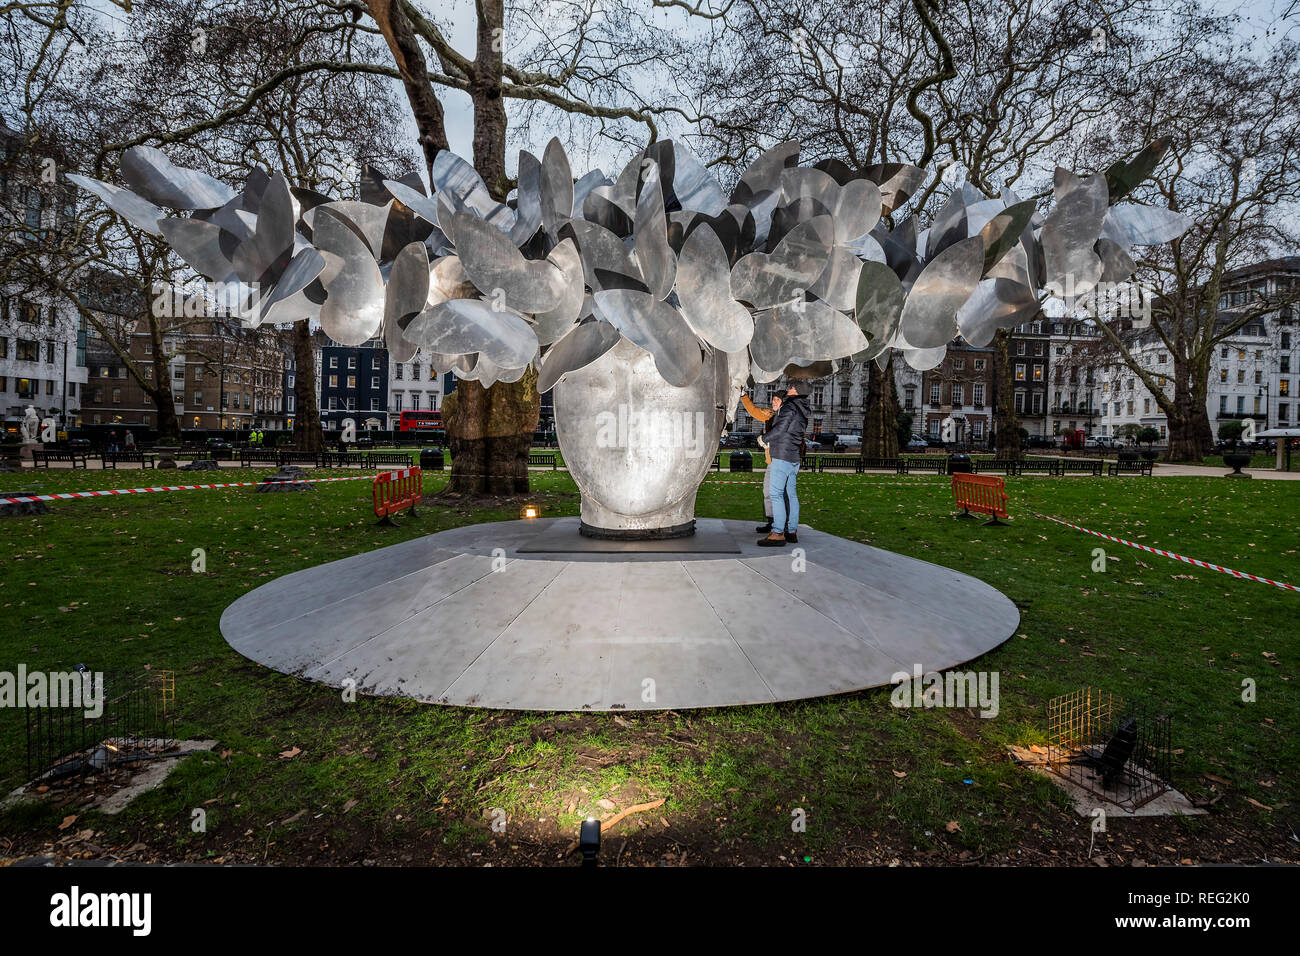 London, UK. 21st Januay 2019. Butterflies by Spanish artist Manolo Valdés launched by Opera Gallery. The sculpture was installed at Berkeley Square in London today, and is one of the eight sculptures included in City of London’s Sculpture in the City initiative that aims to turn the city into an urban gallery space. Weighing over five tonnes, the giant sculpture will be residing at its Mayfair location for six months. Credit: Guy Bell/Alamy Live News Stock Photo